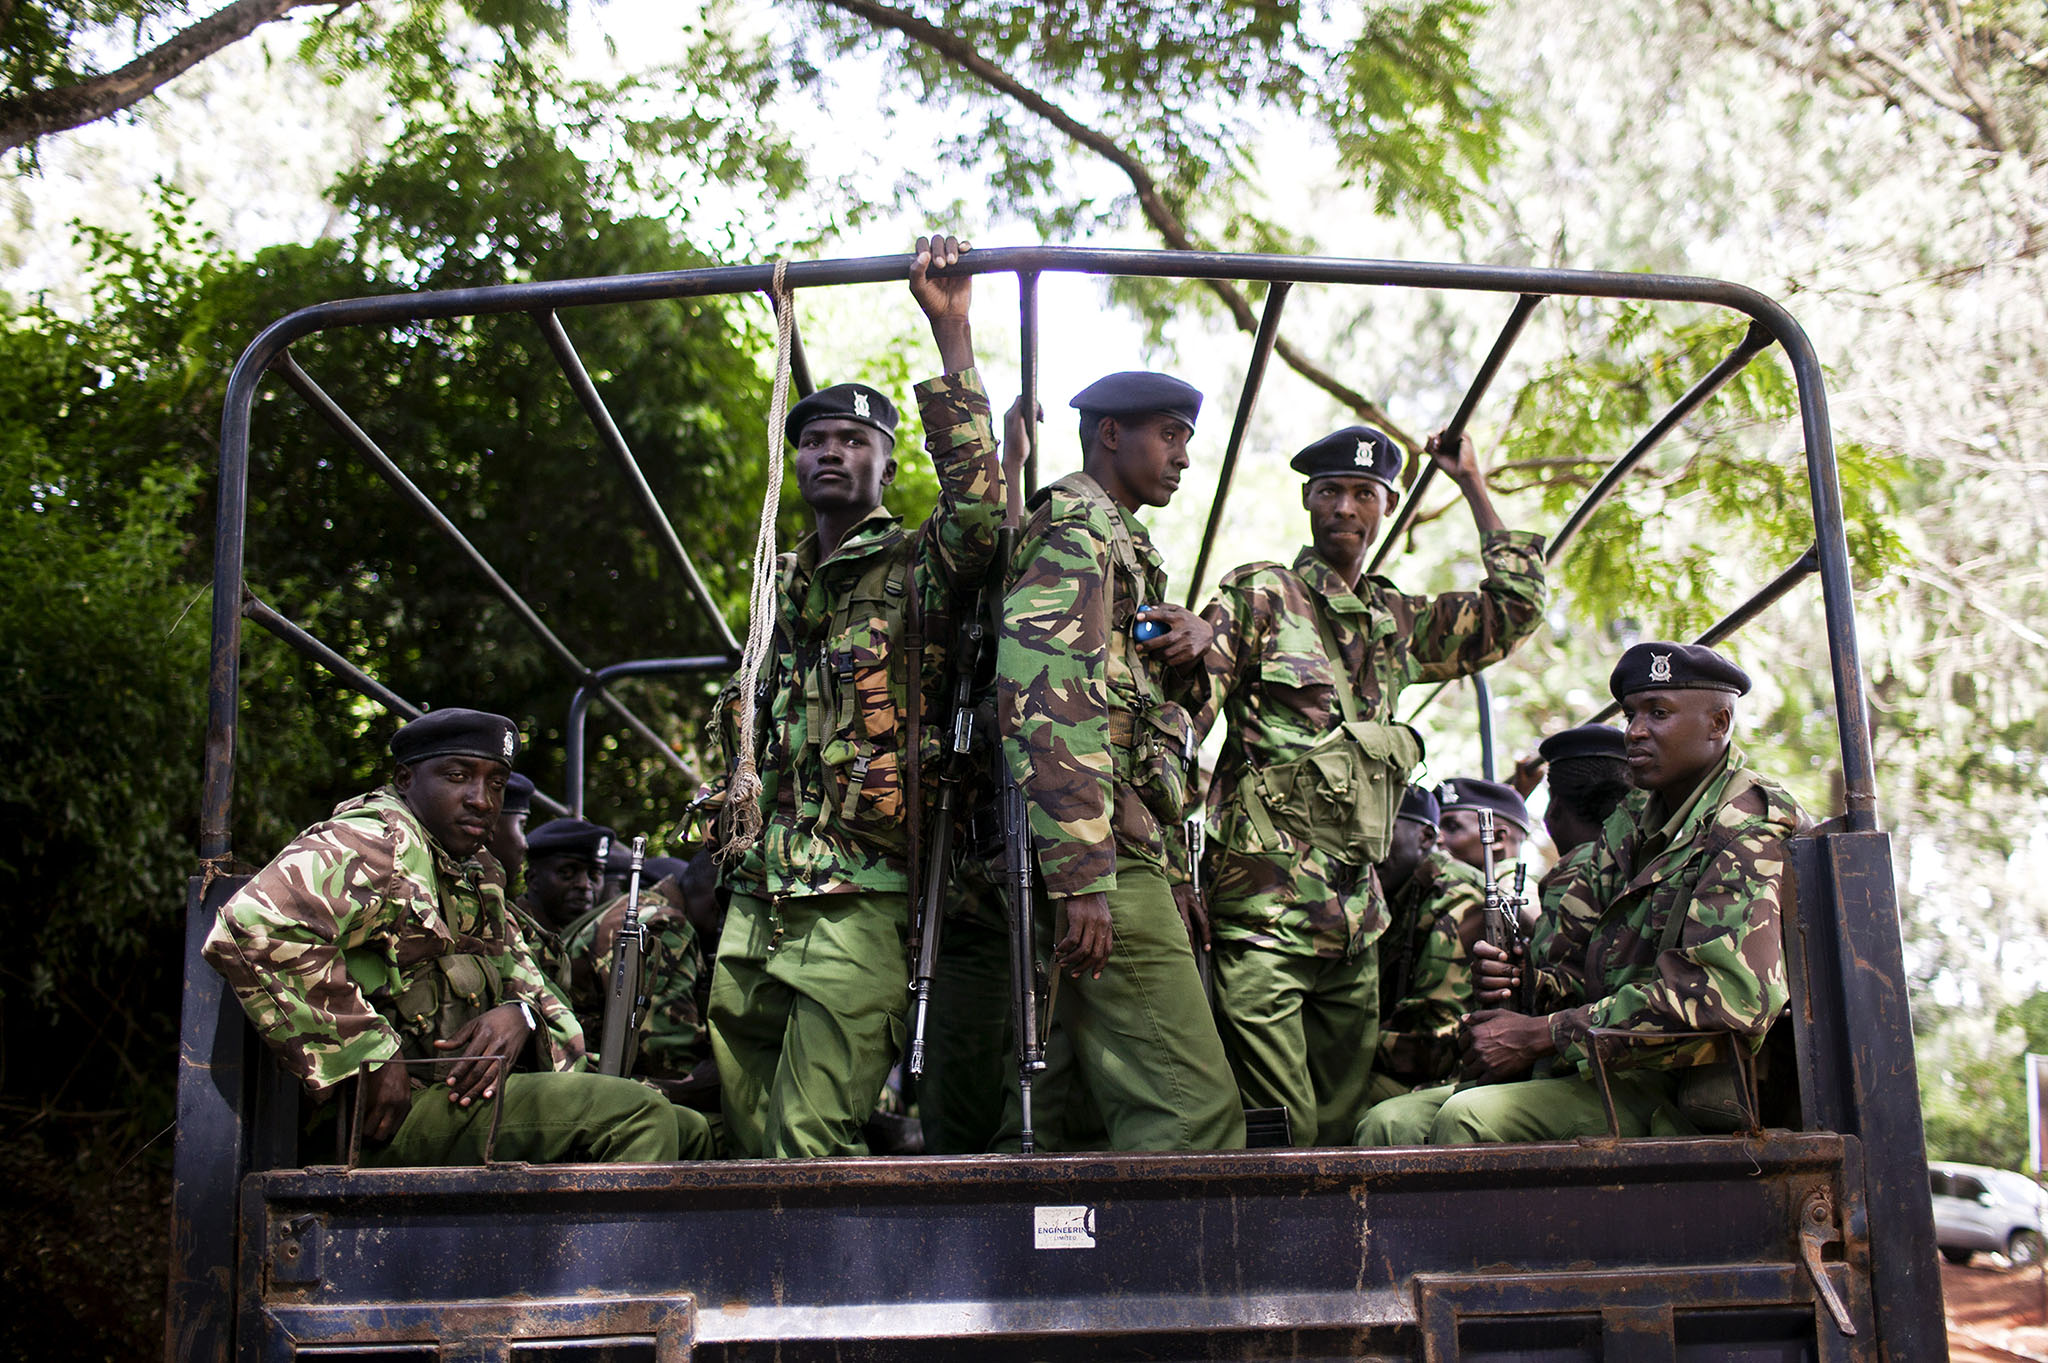 Members of Kenya's General Service Unit (GSU) stand in Nairobi, Kenya, March 7, 2013. Parts of the GSU are slated to go to Haiti to help break the grip of the armed gangs that control most of the capital, Port-au-Prince. (Pete Muller/The New York Times)